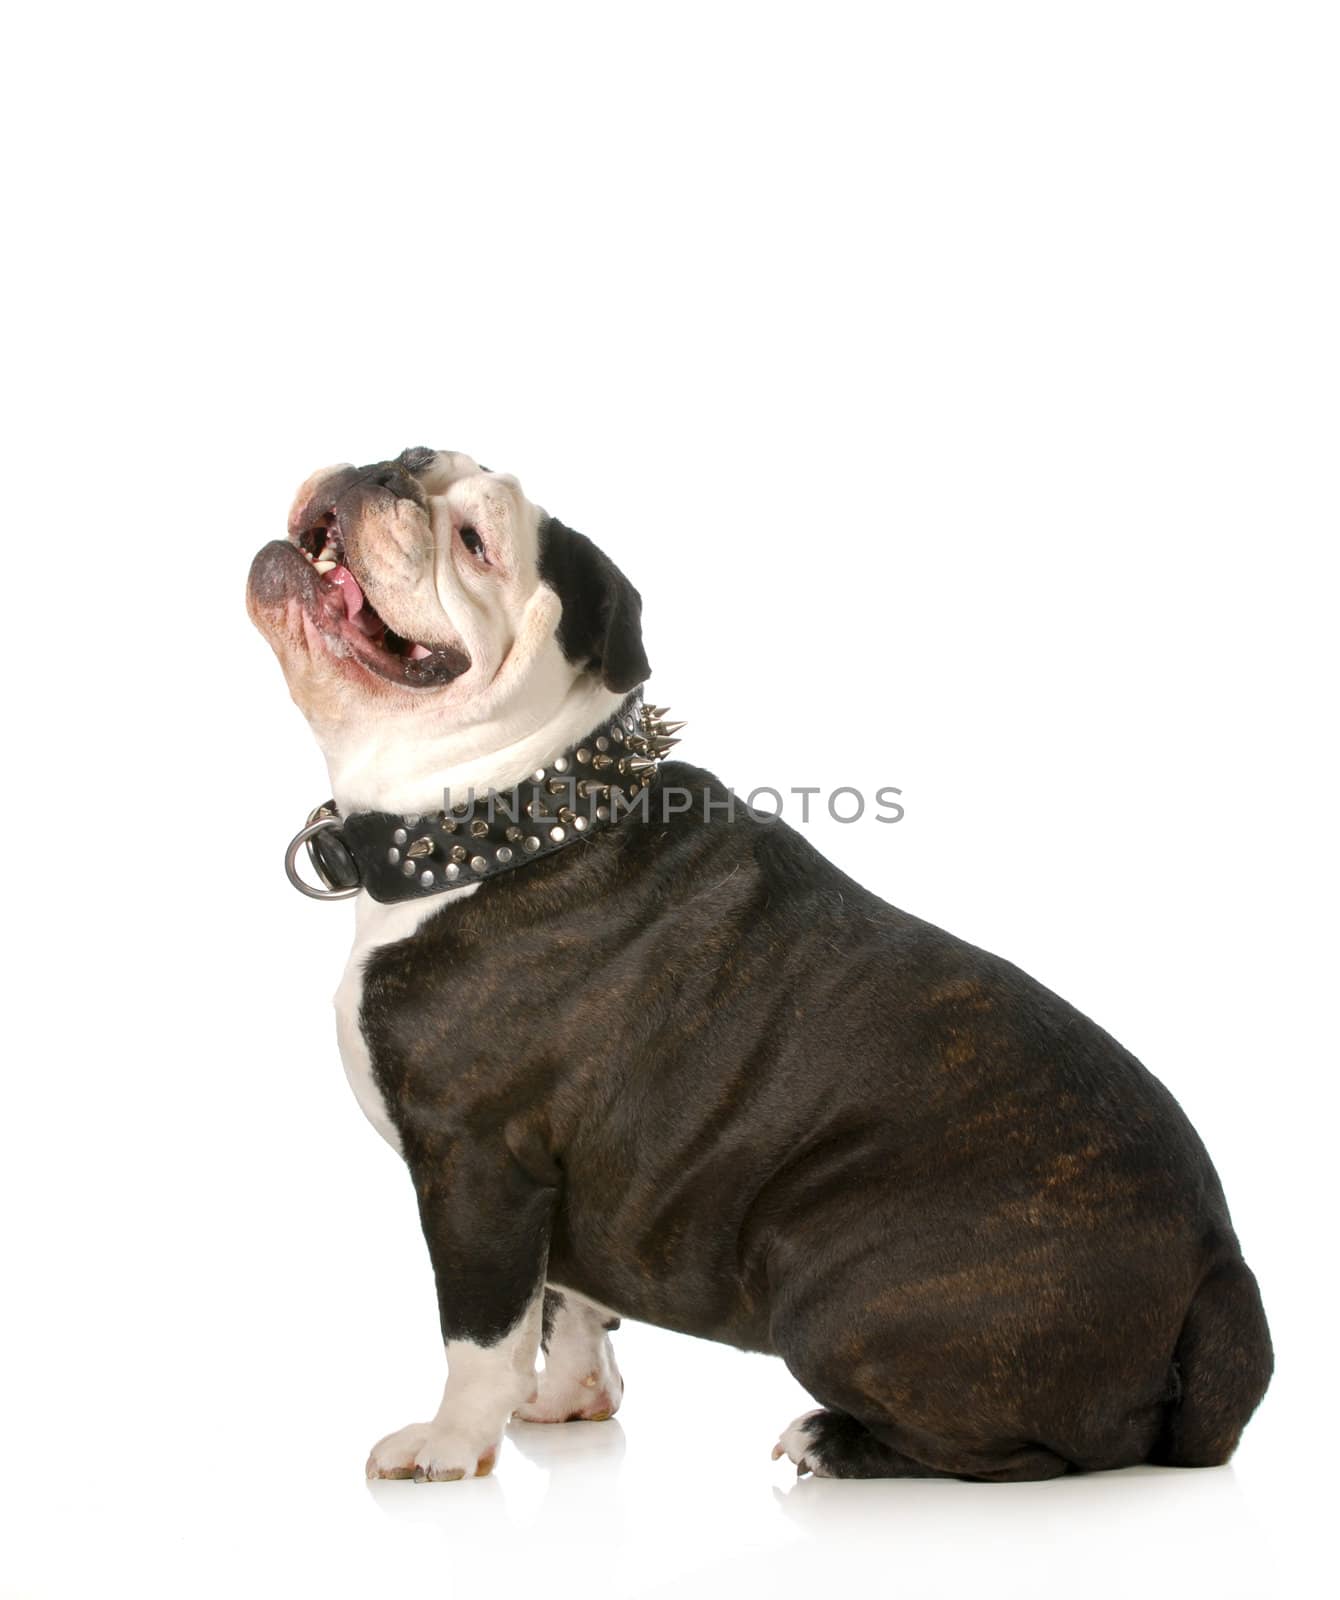 happy dog - bulldog wearing spiked collar looking up on white background